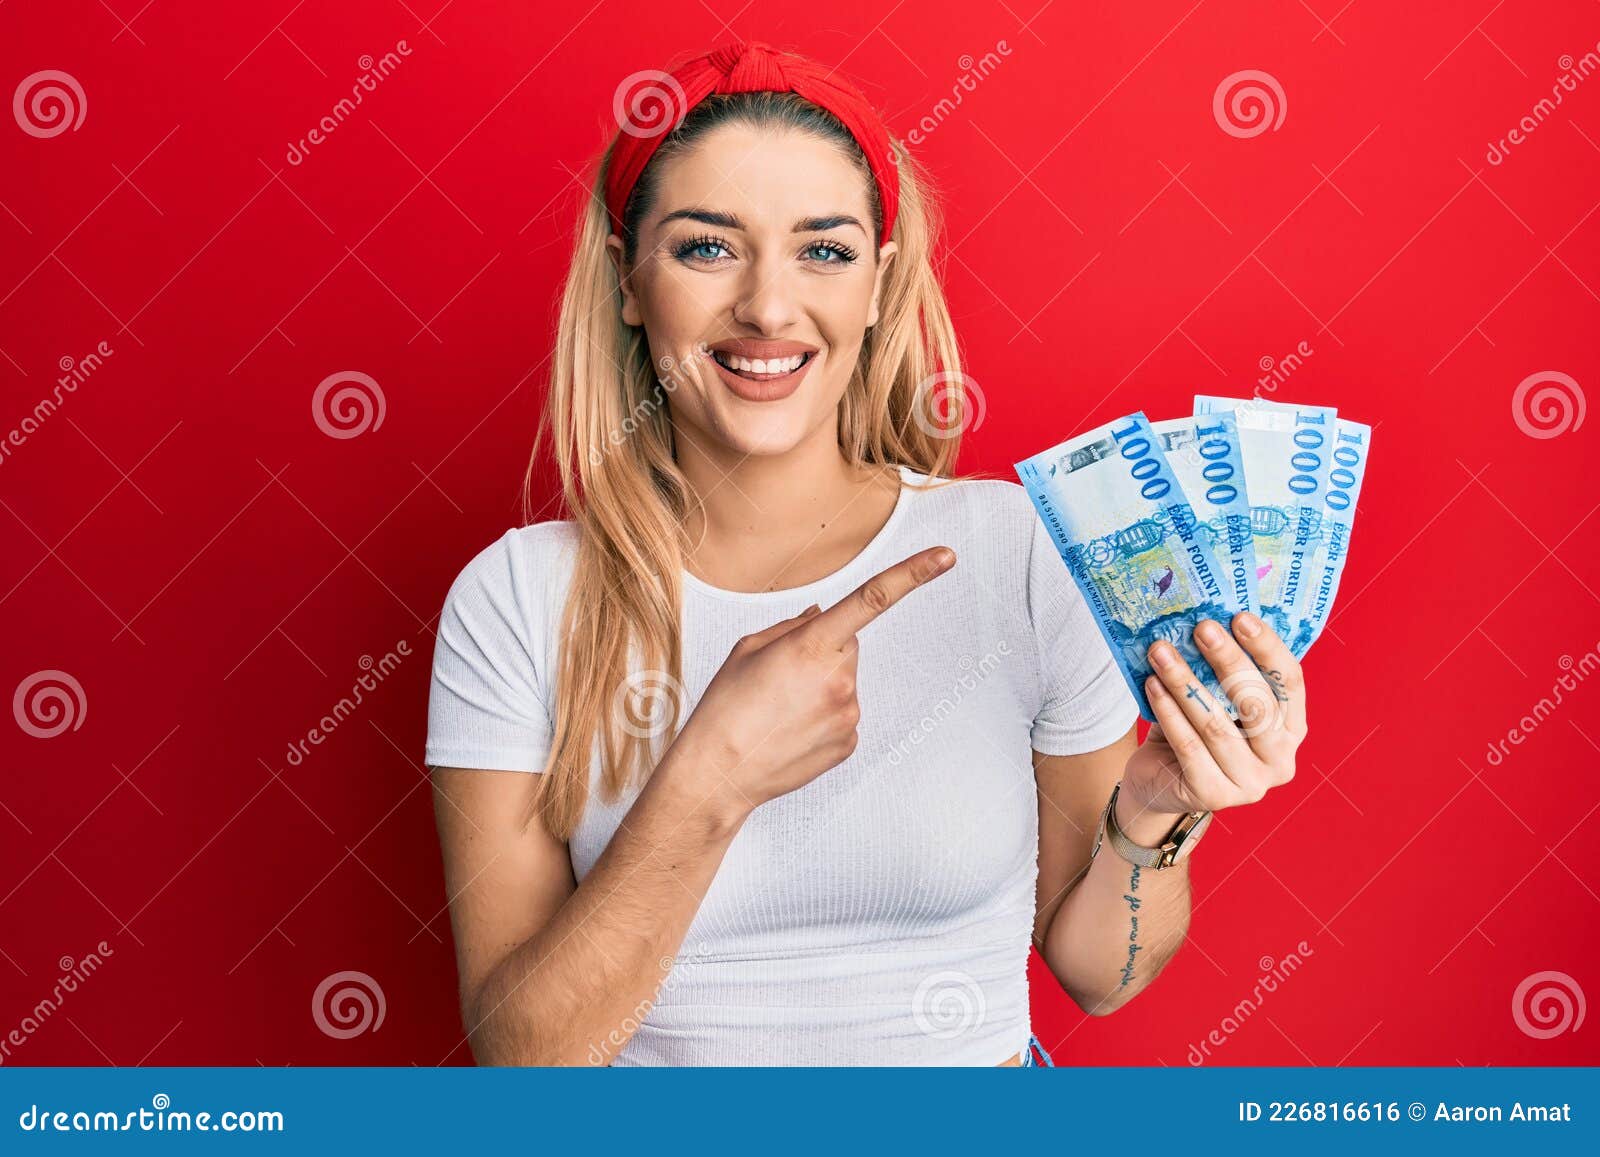 Young Caucasian Woman Holding 1000 Hungarian Forint Banknotes Smiling Happy Pointing With Hand